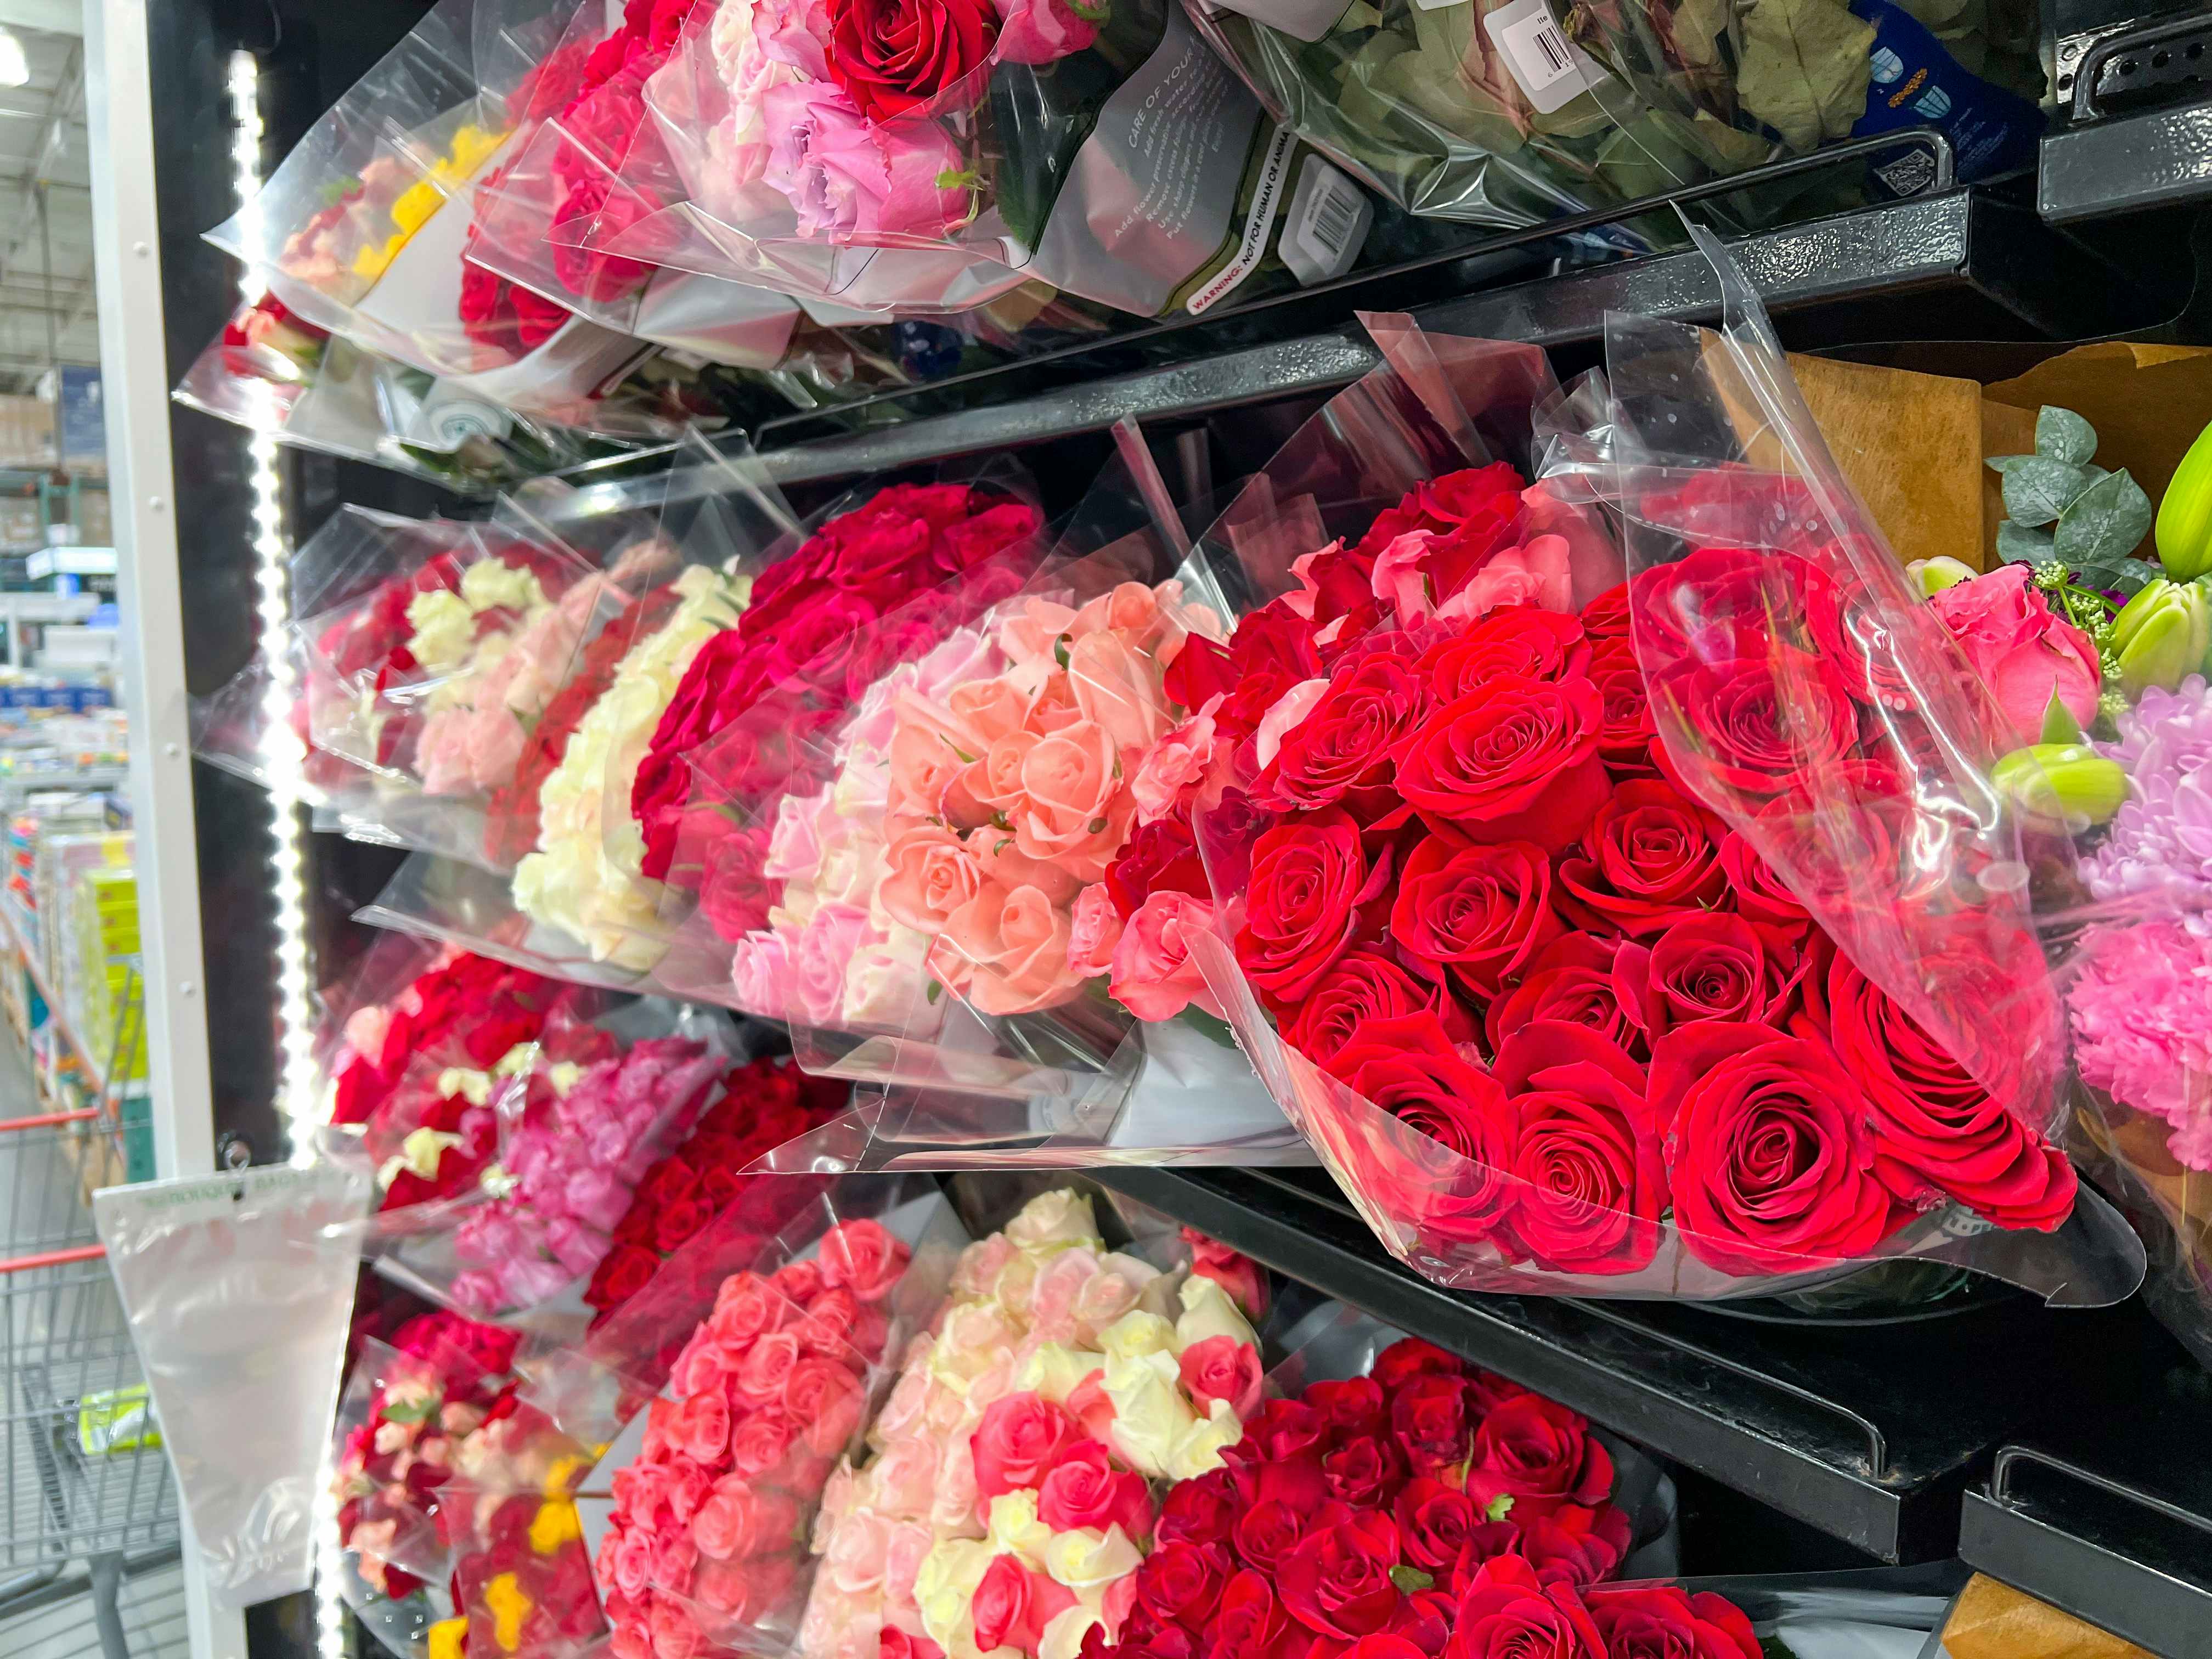 a variety of red and pink rose bouquets in the Costco flowers display in the warehouse